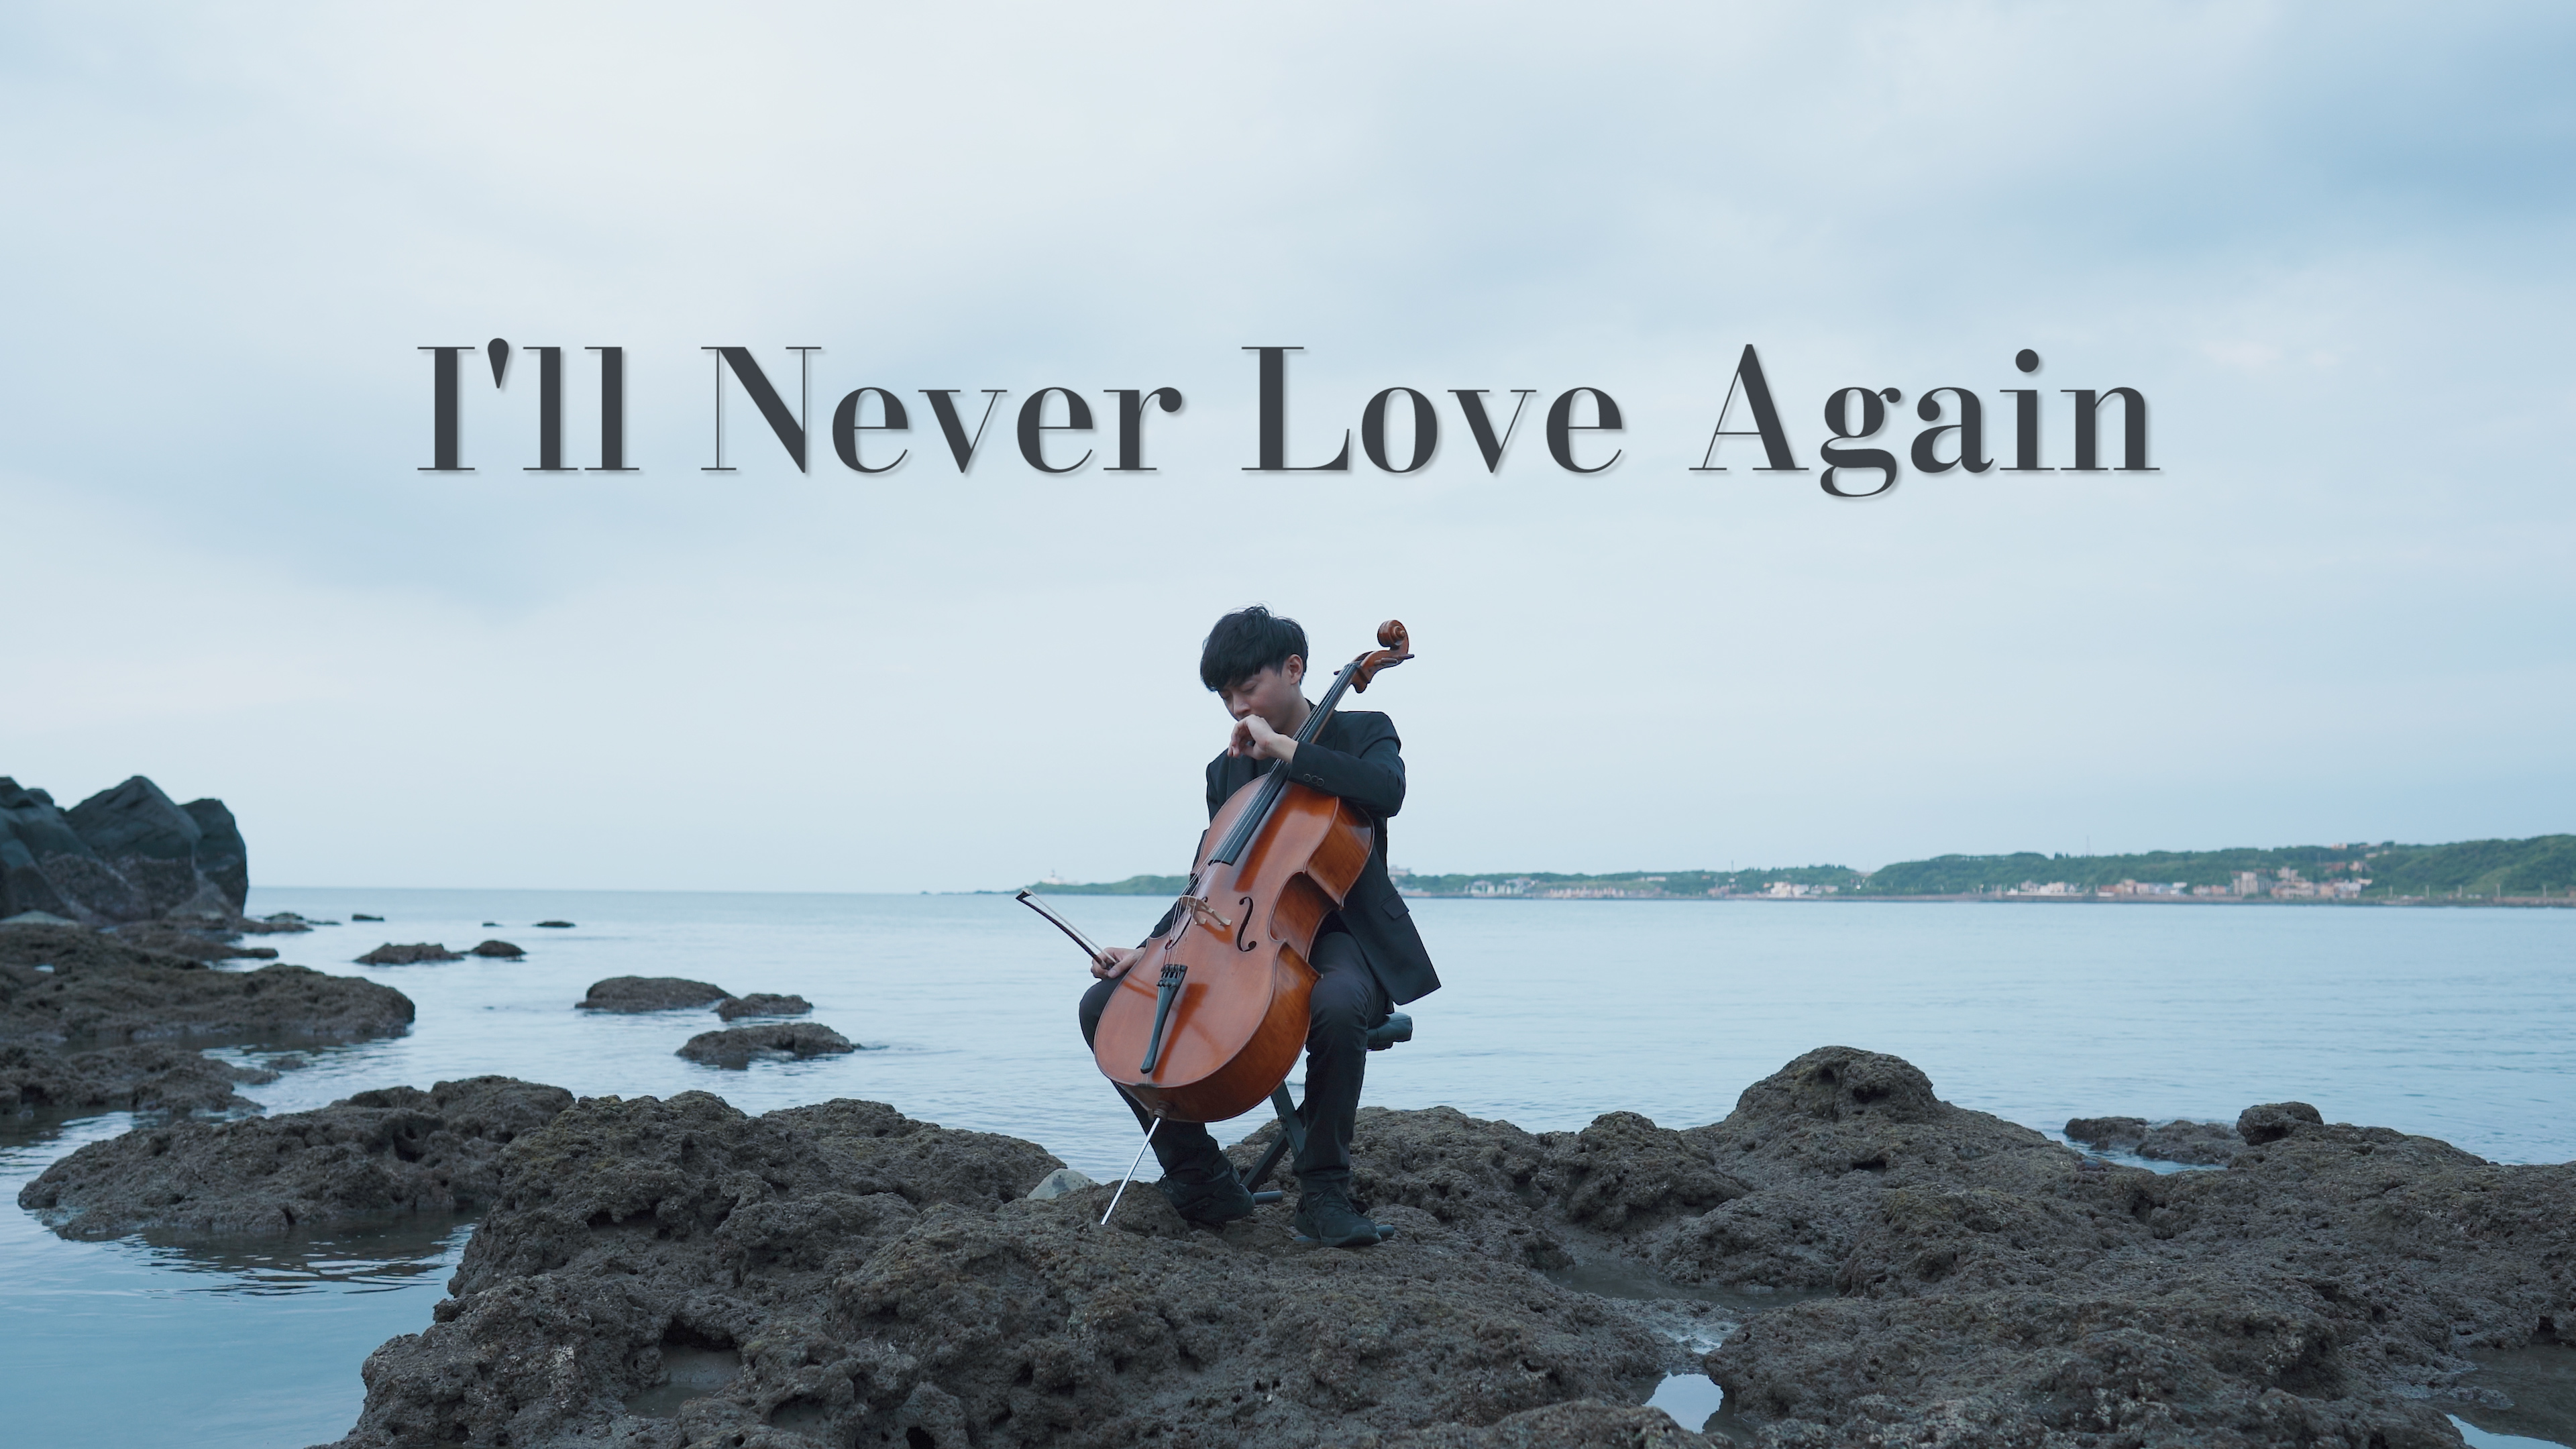 I'll Never Love Again from (A Star Is Born) 《一個巨星的誕生》 - 大提琴演奏 『cover by YoYo Cello』